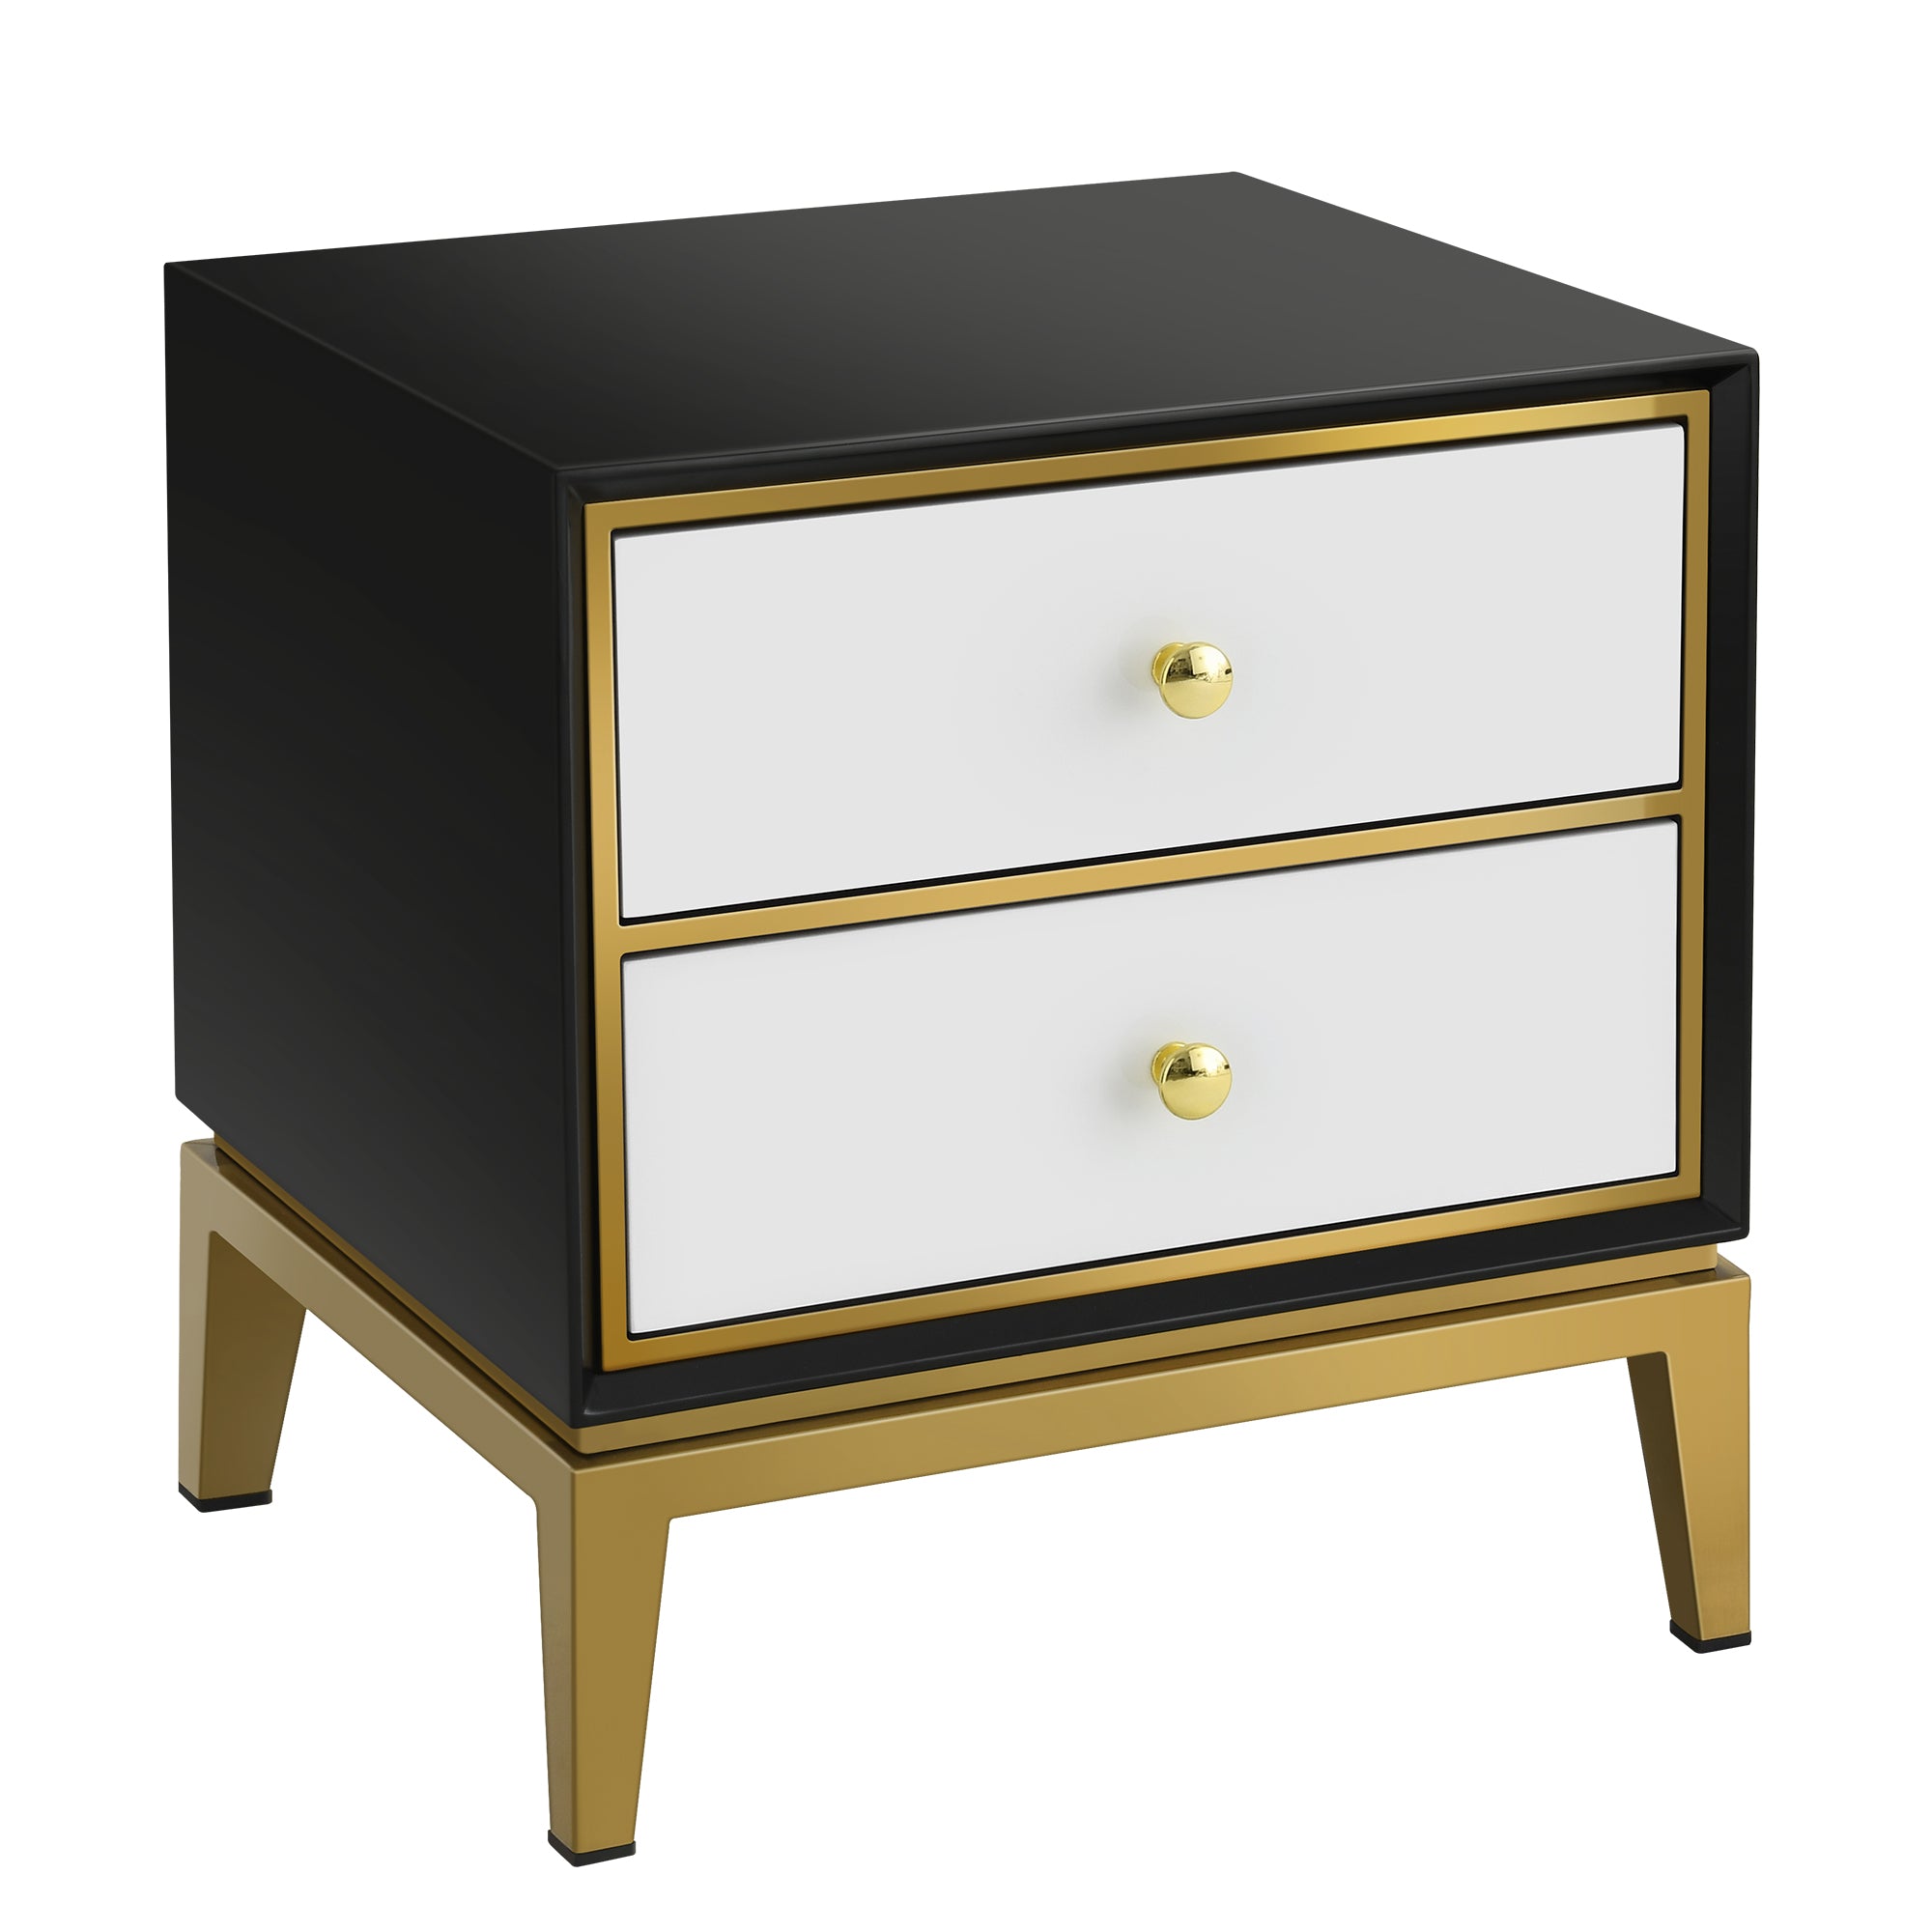 Odette 20" Modern Metal Base Nightstand with Solid Wood 2 Drawers, Black-Gold